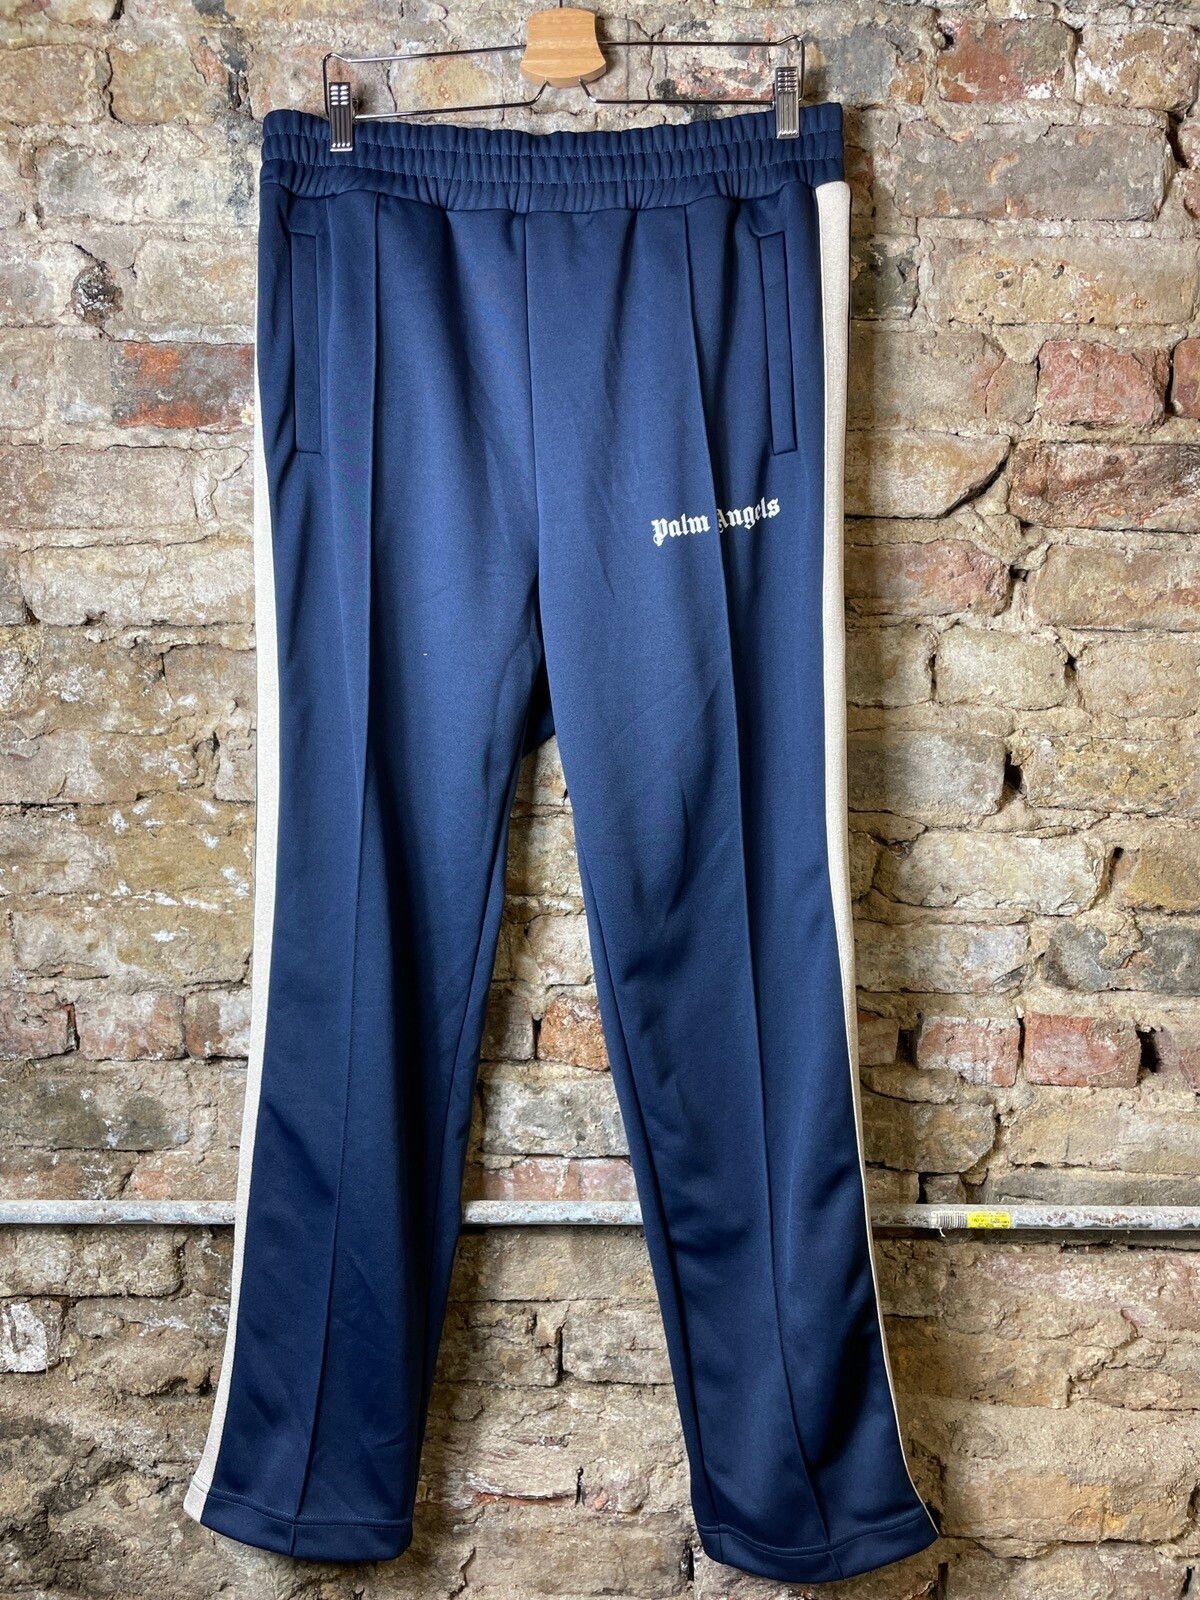 Pre-owned Palm Angels Track Pants Size Xxl Used In Navy